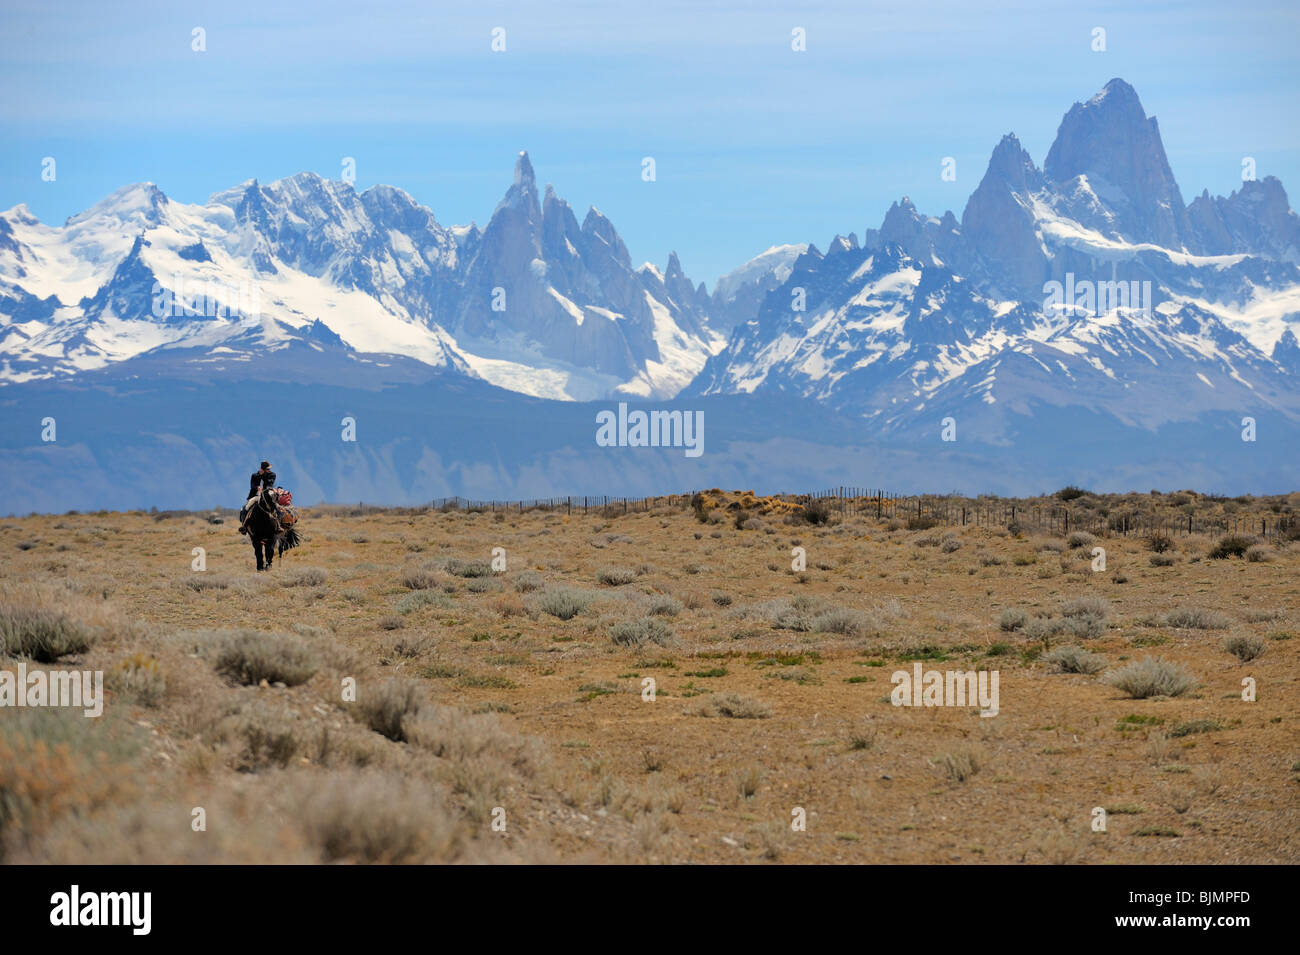 Mounted goucho in front the Andes with Mt. Fitz Roy and Mt. Cerro Torre, El Chalten, Andes, Patagonia, Argentina, South America Stock Photo